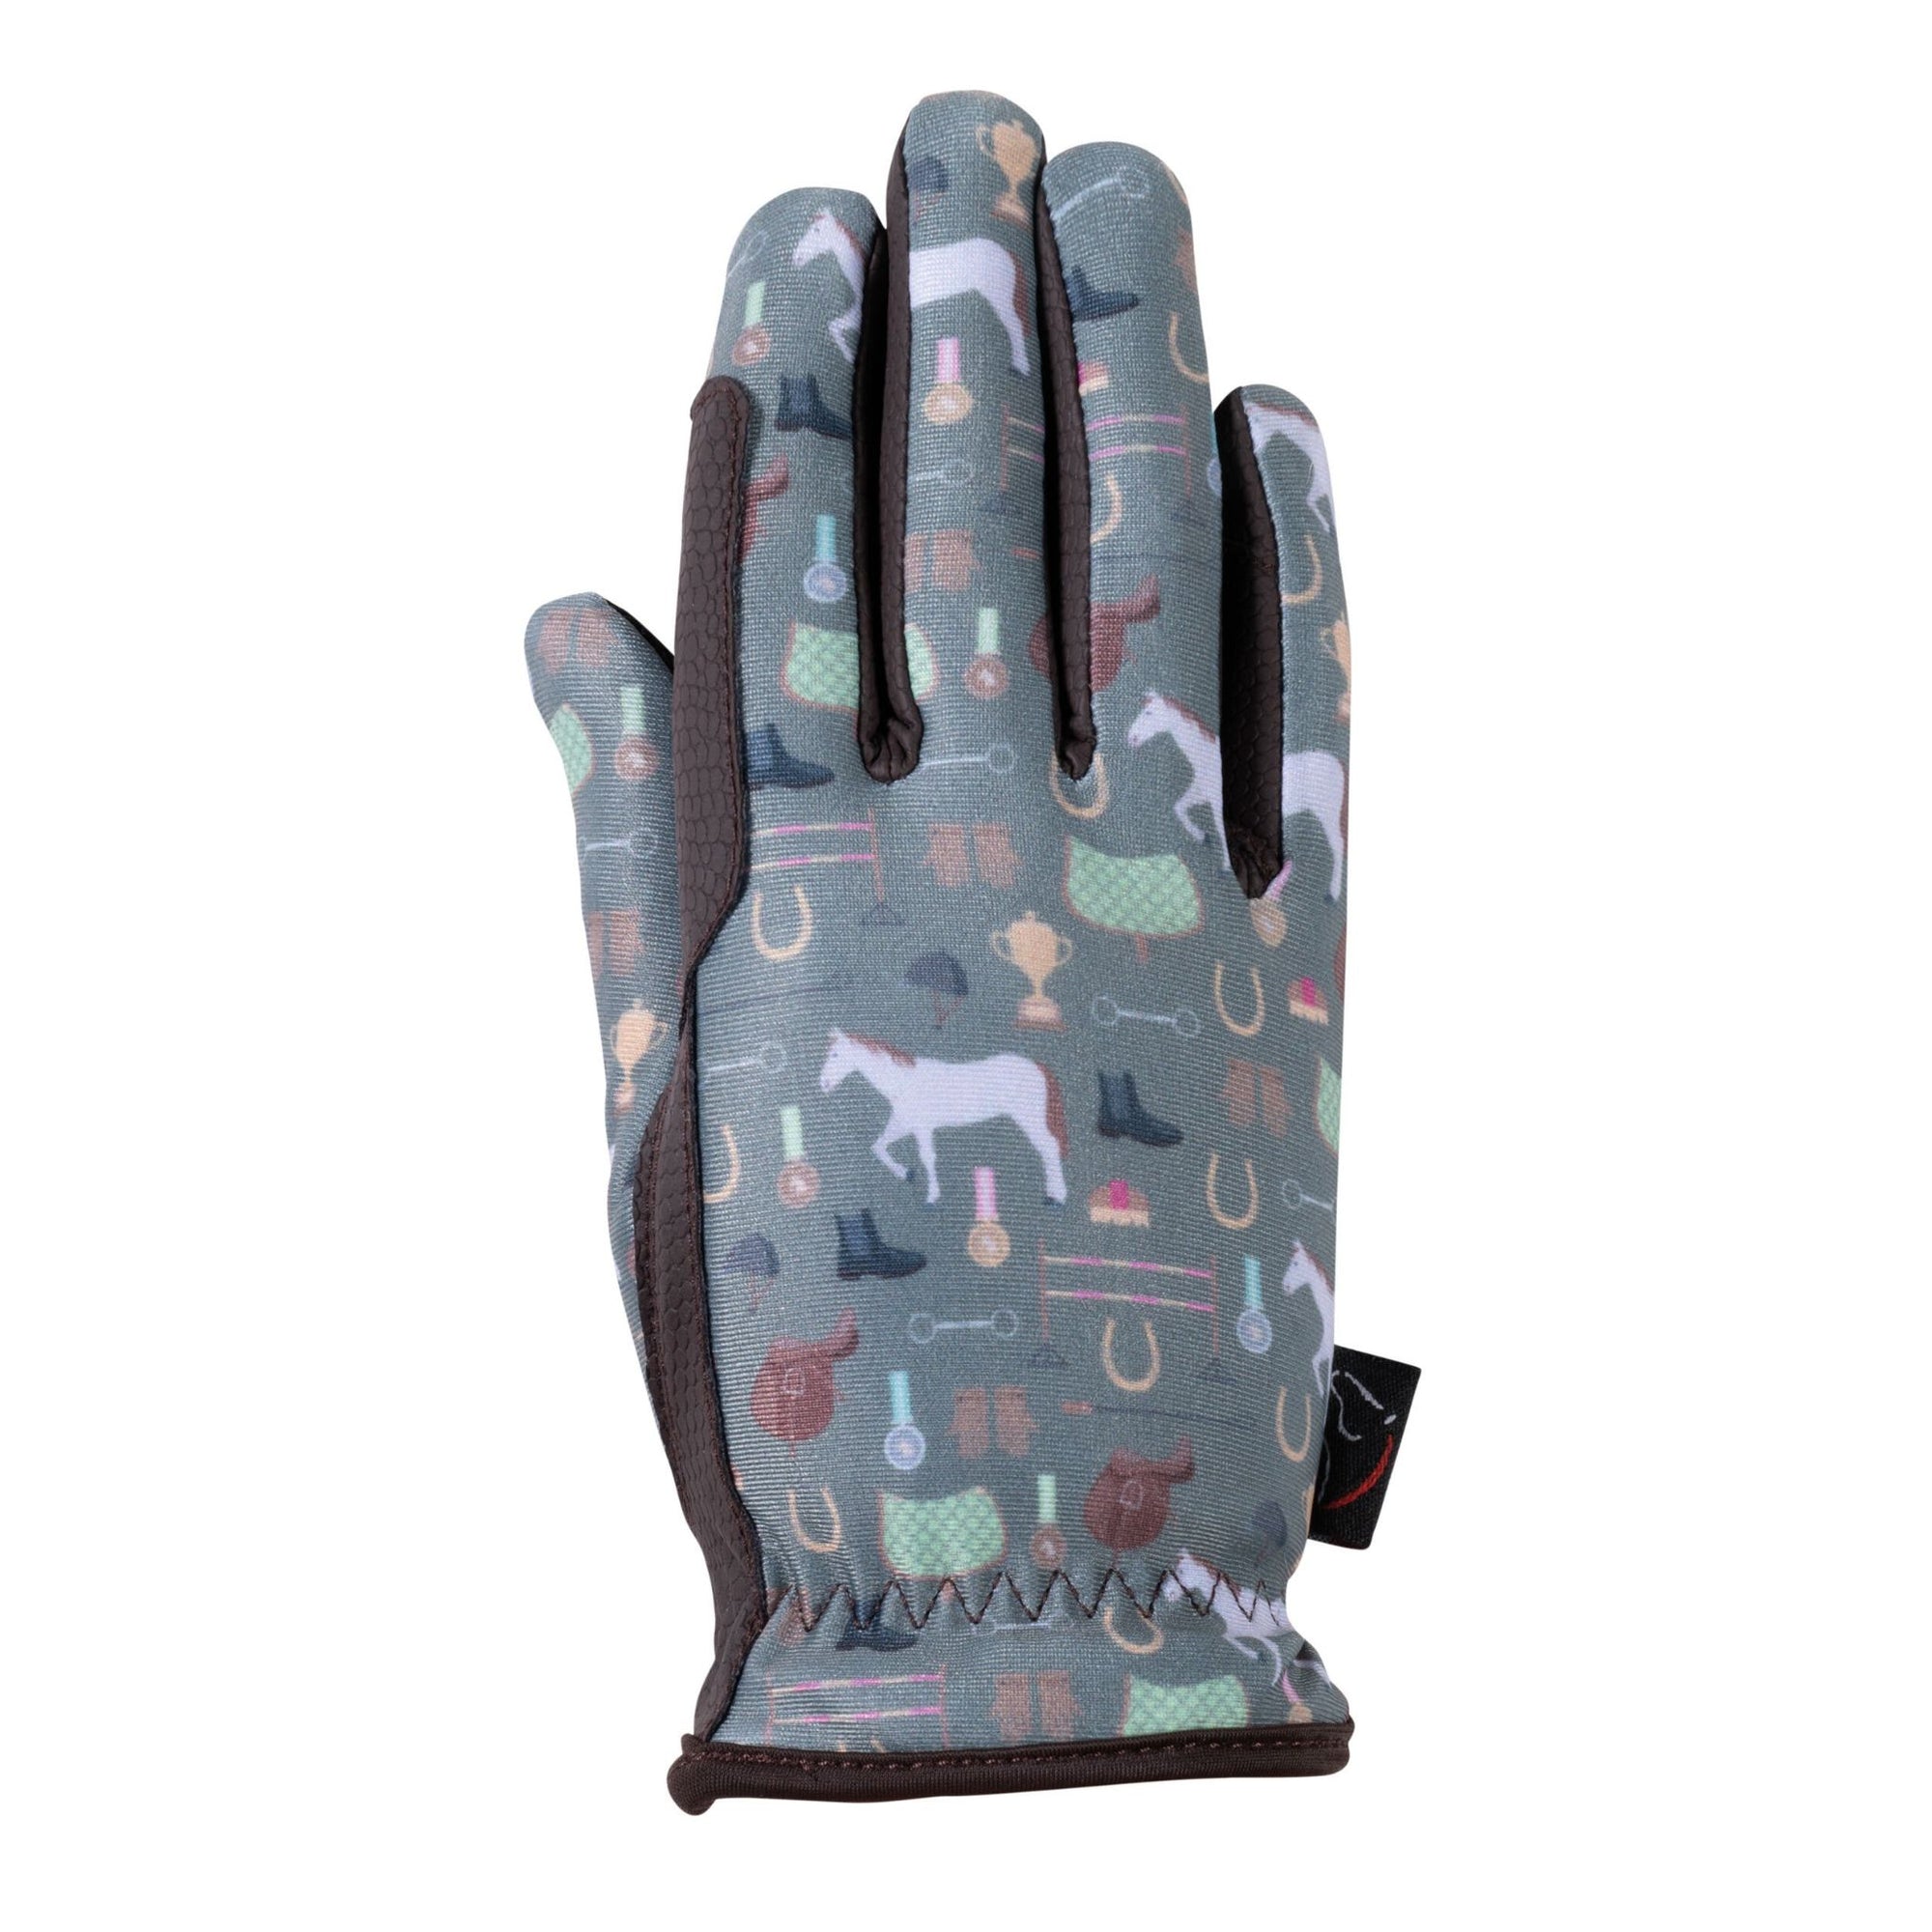 Green kids gloves with horse accessories printed on them.